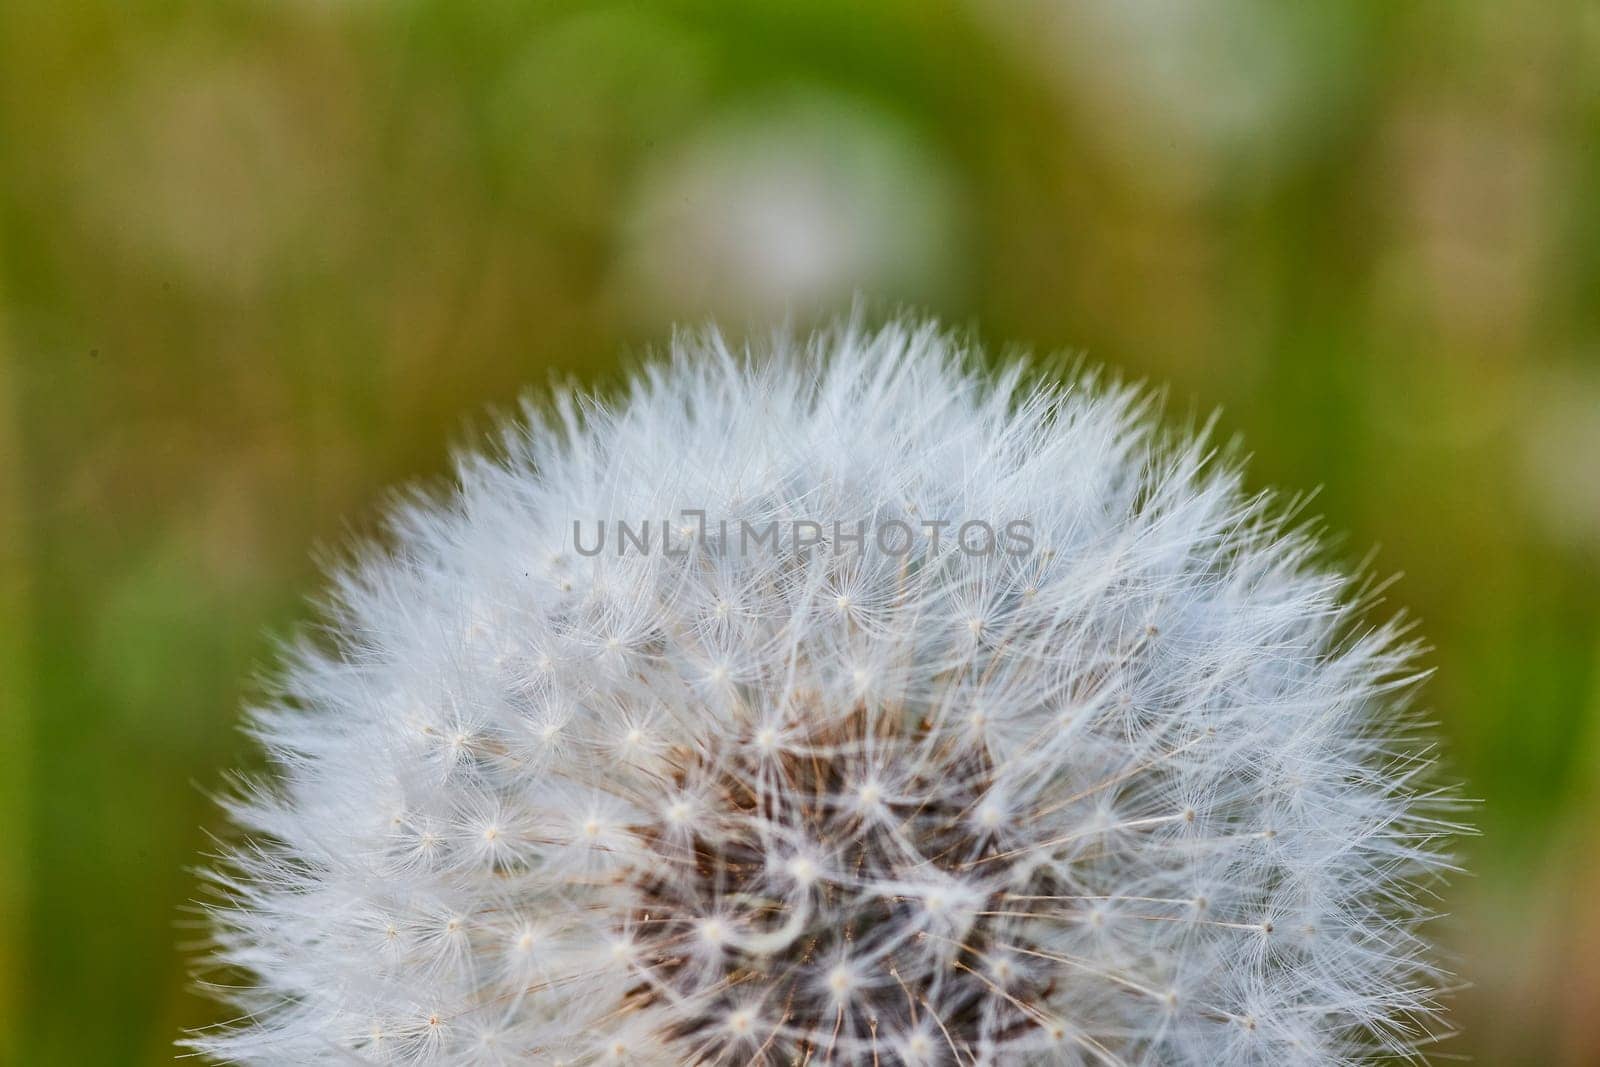 Delicate dandelion seed head close-up, showcasing nature's intricacy against a soft, green backdrop in Fort Wayne.